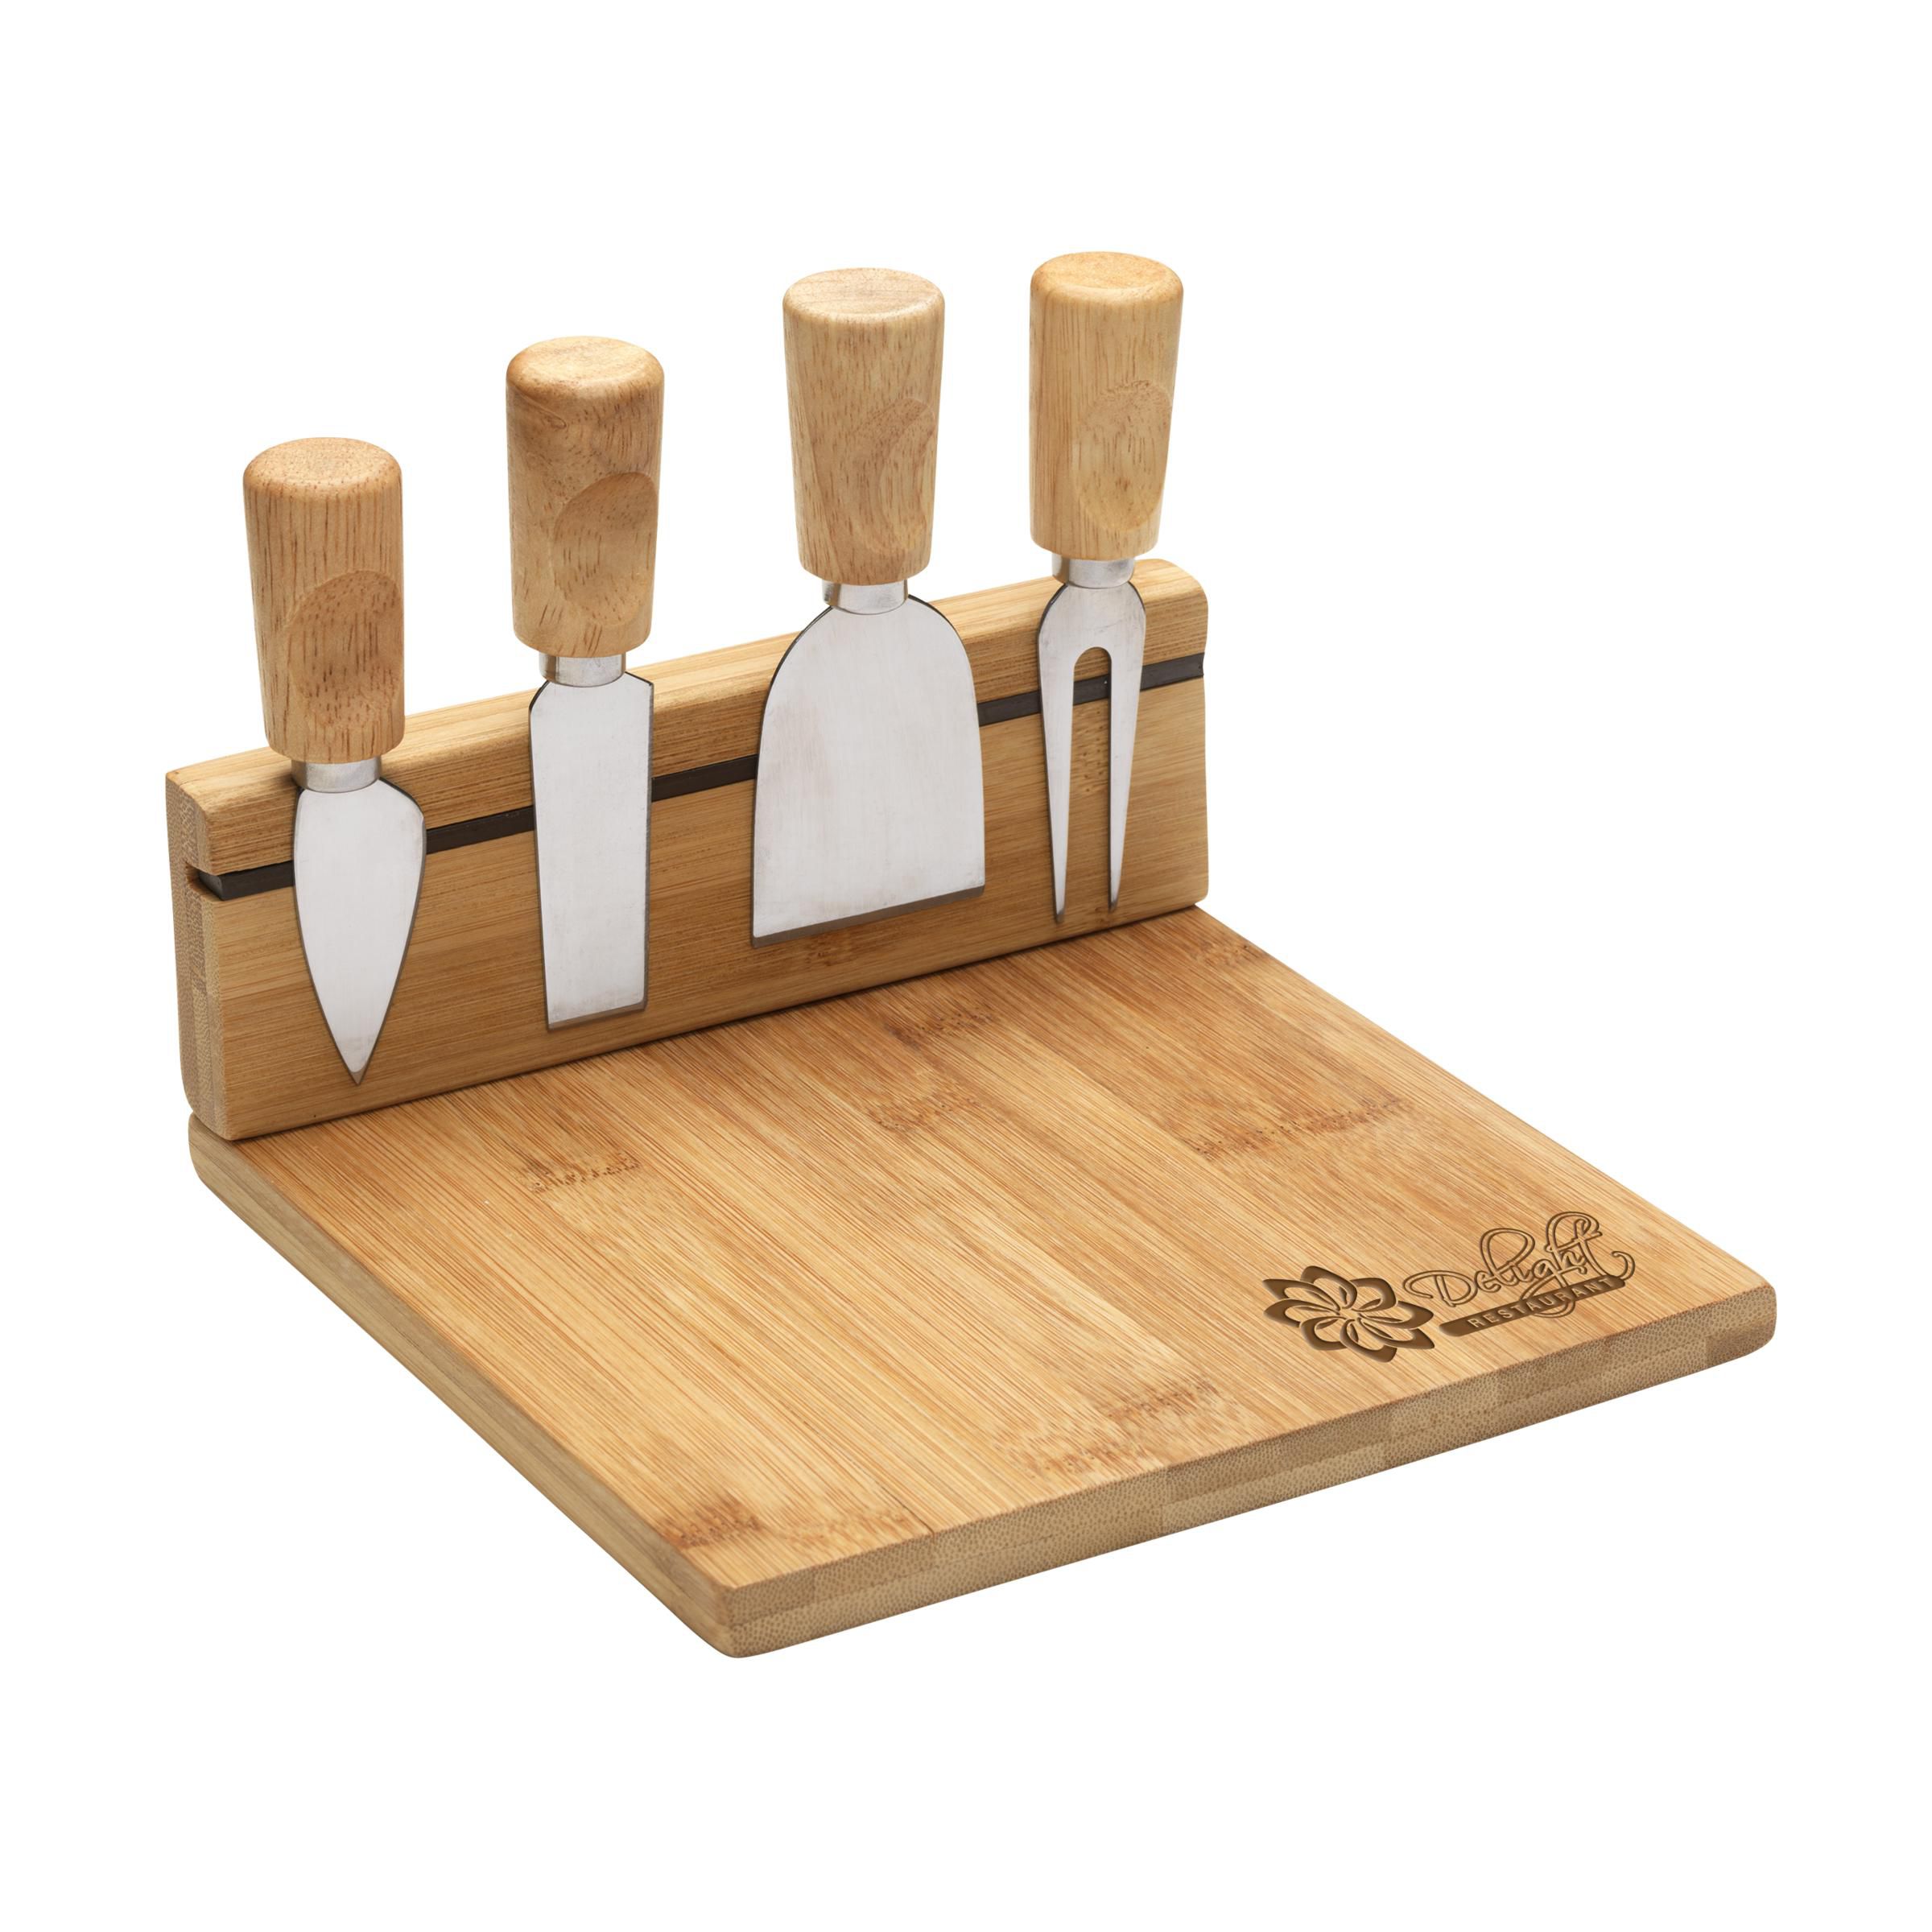 Cheese Board with logo - Order from Pagerr